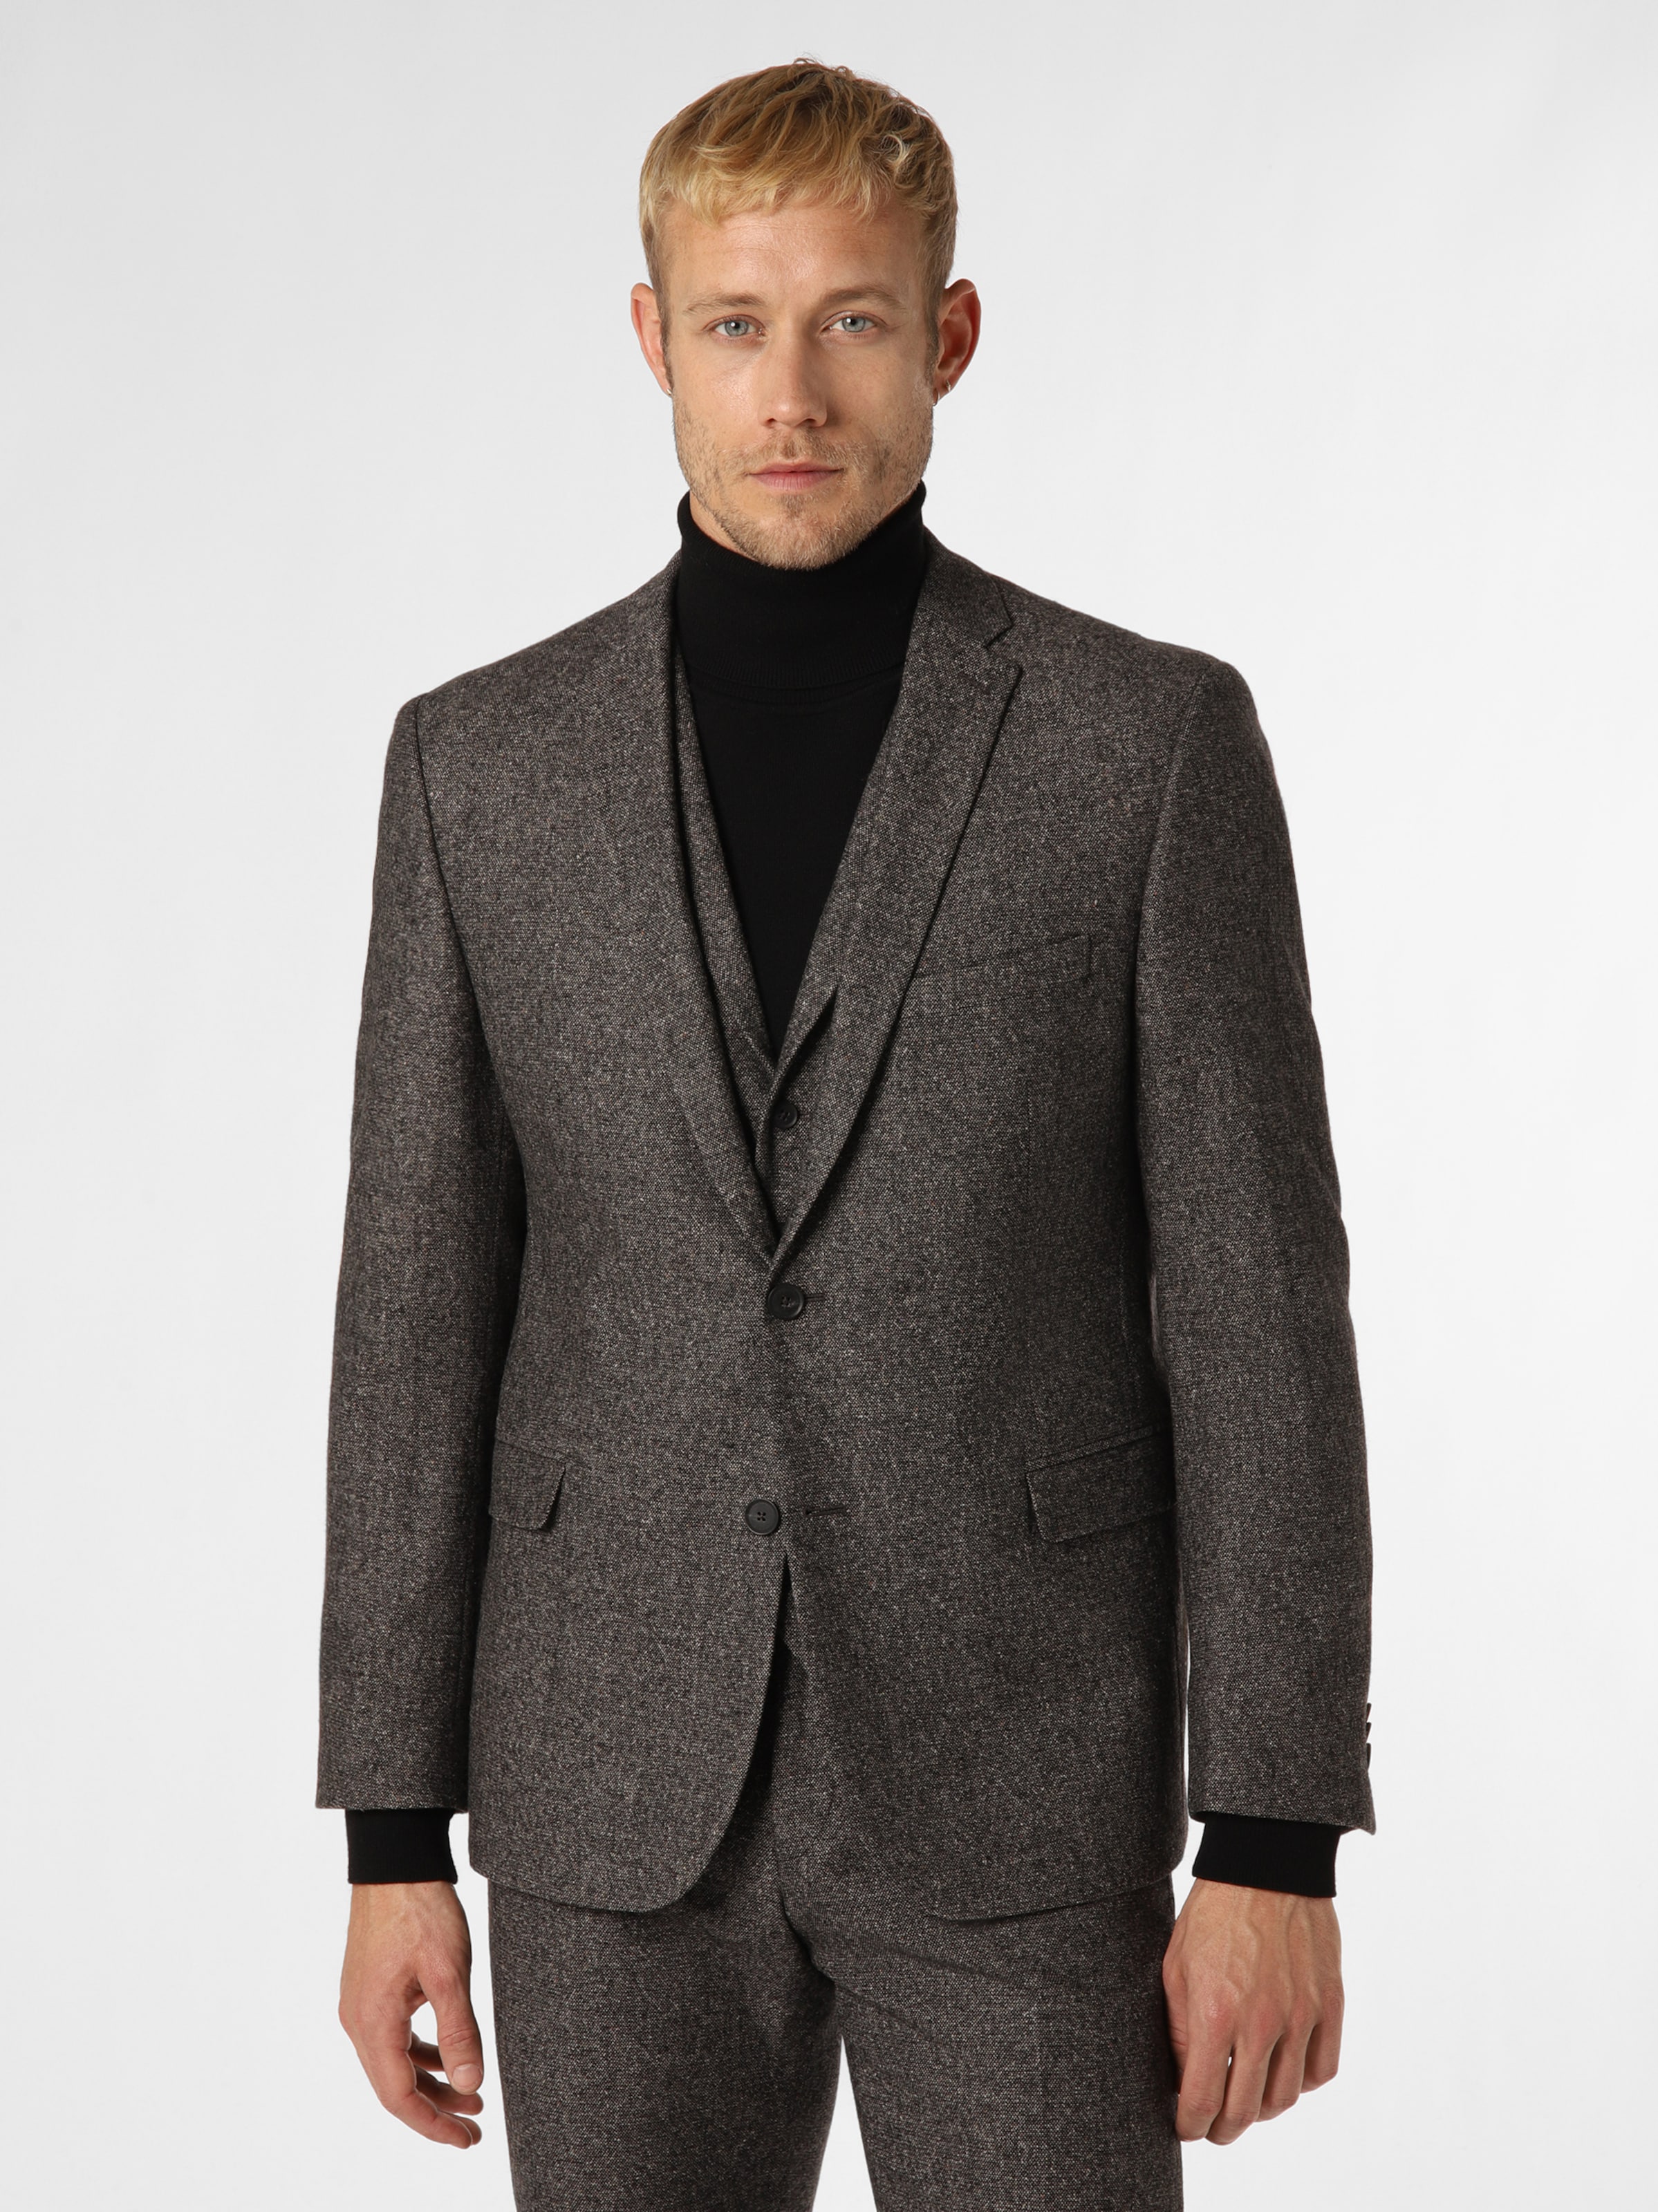 Finshley & Harding Suits & jackets for men | Buy online | ABOUT YOU